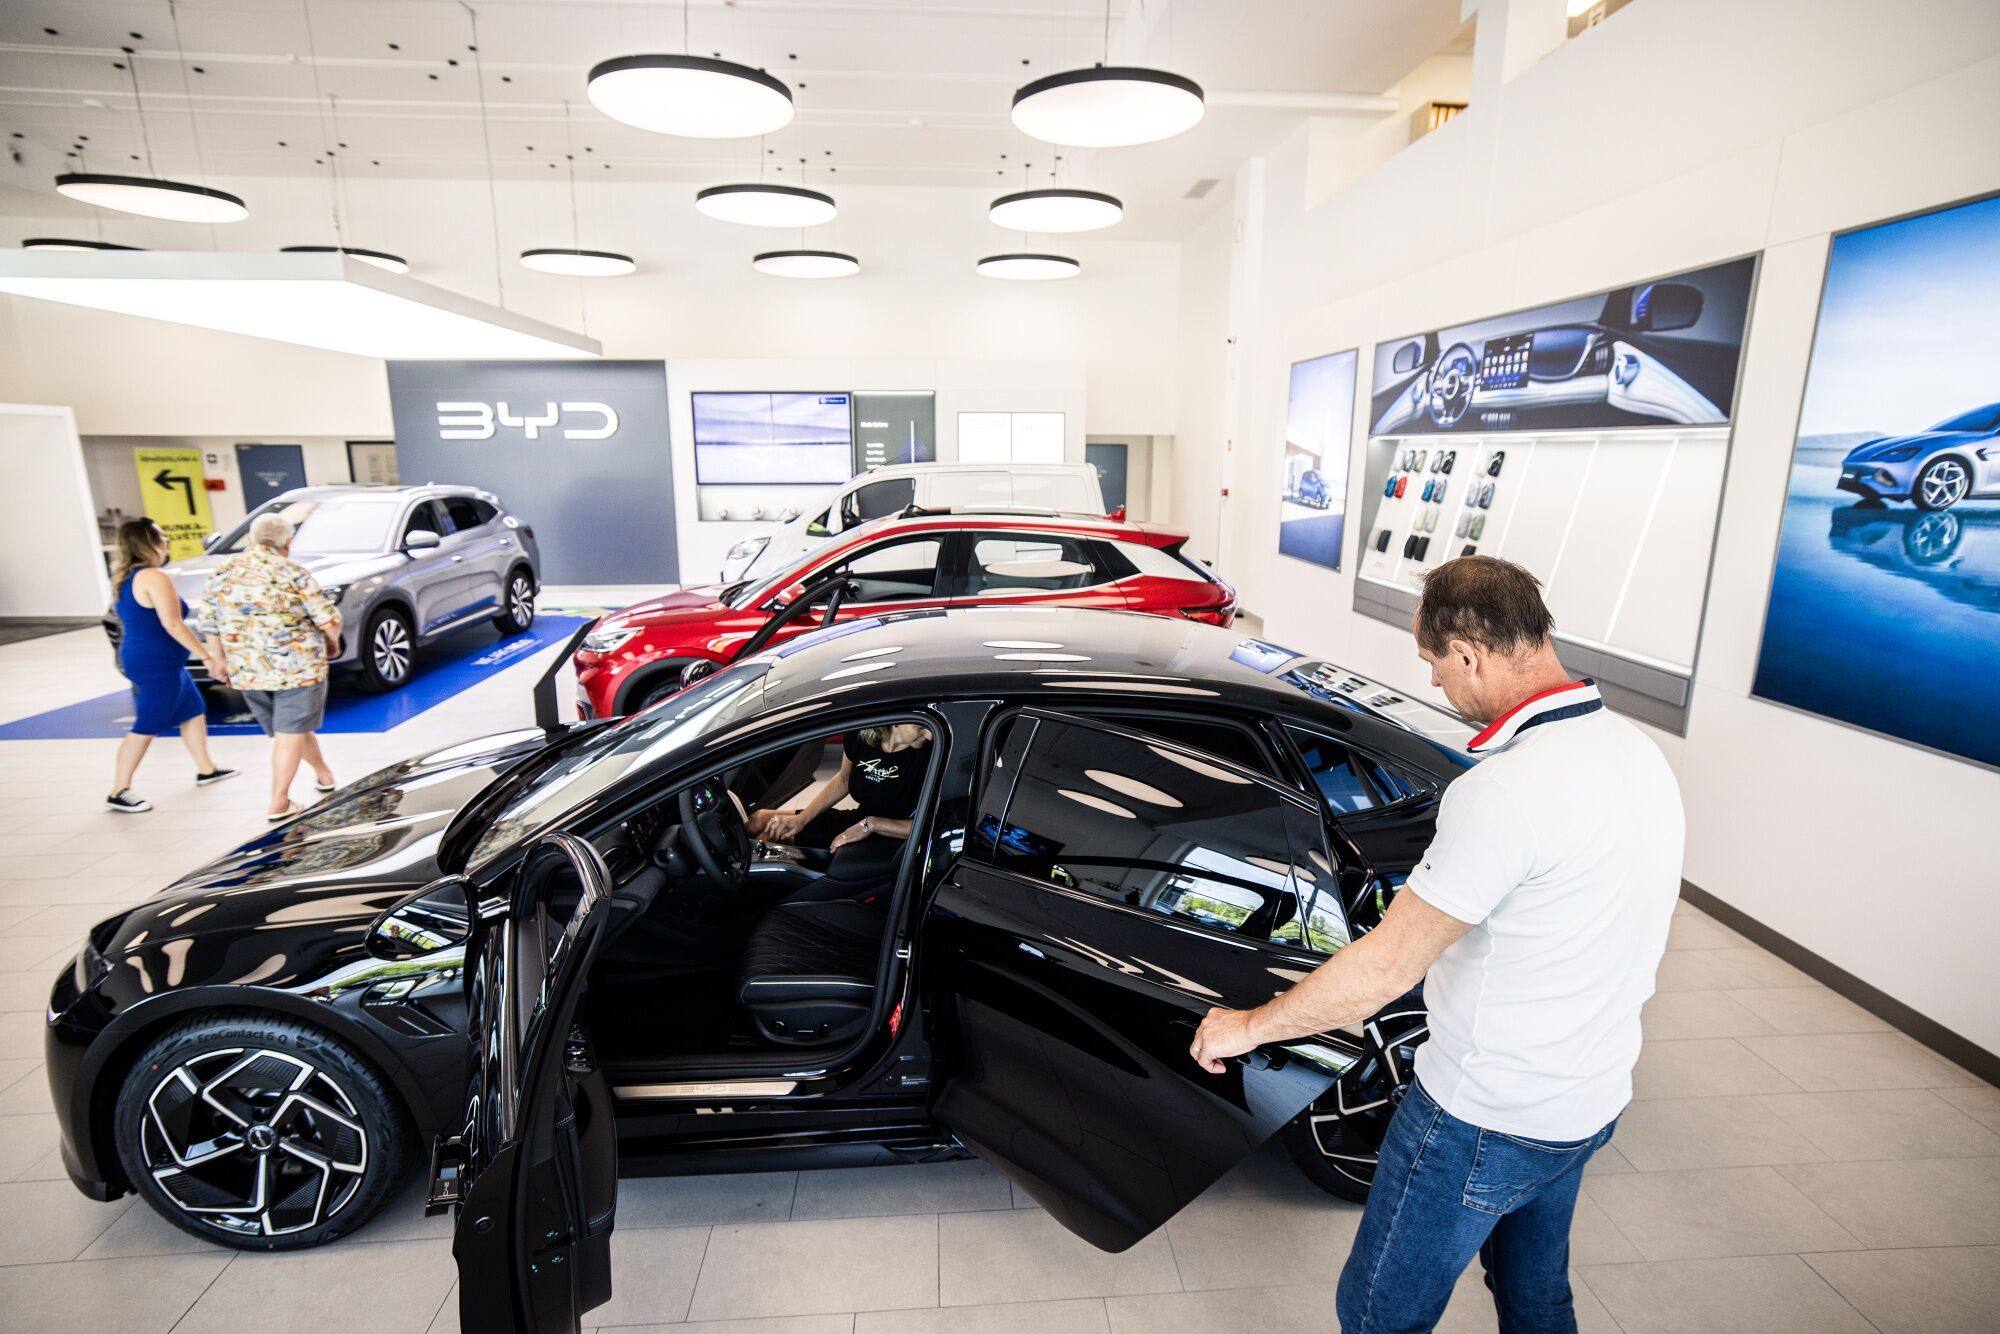 Customers look at electric vehicles inside a BYD showroom in Budapest, Hungary. Photo: Bloomberg